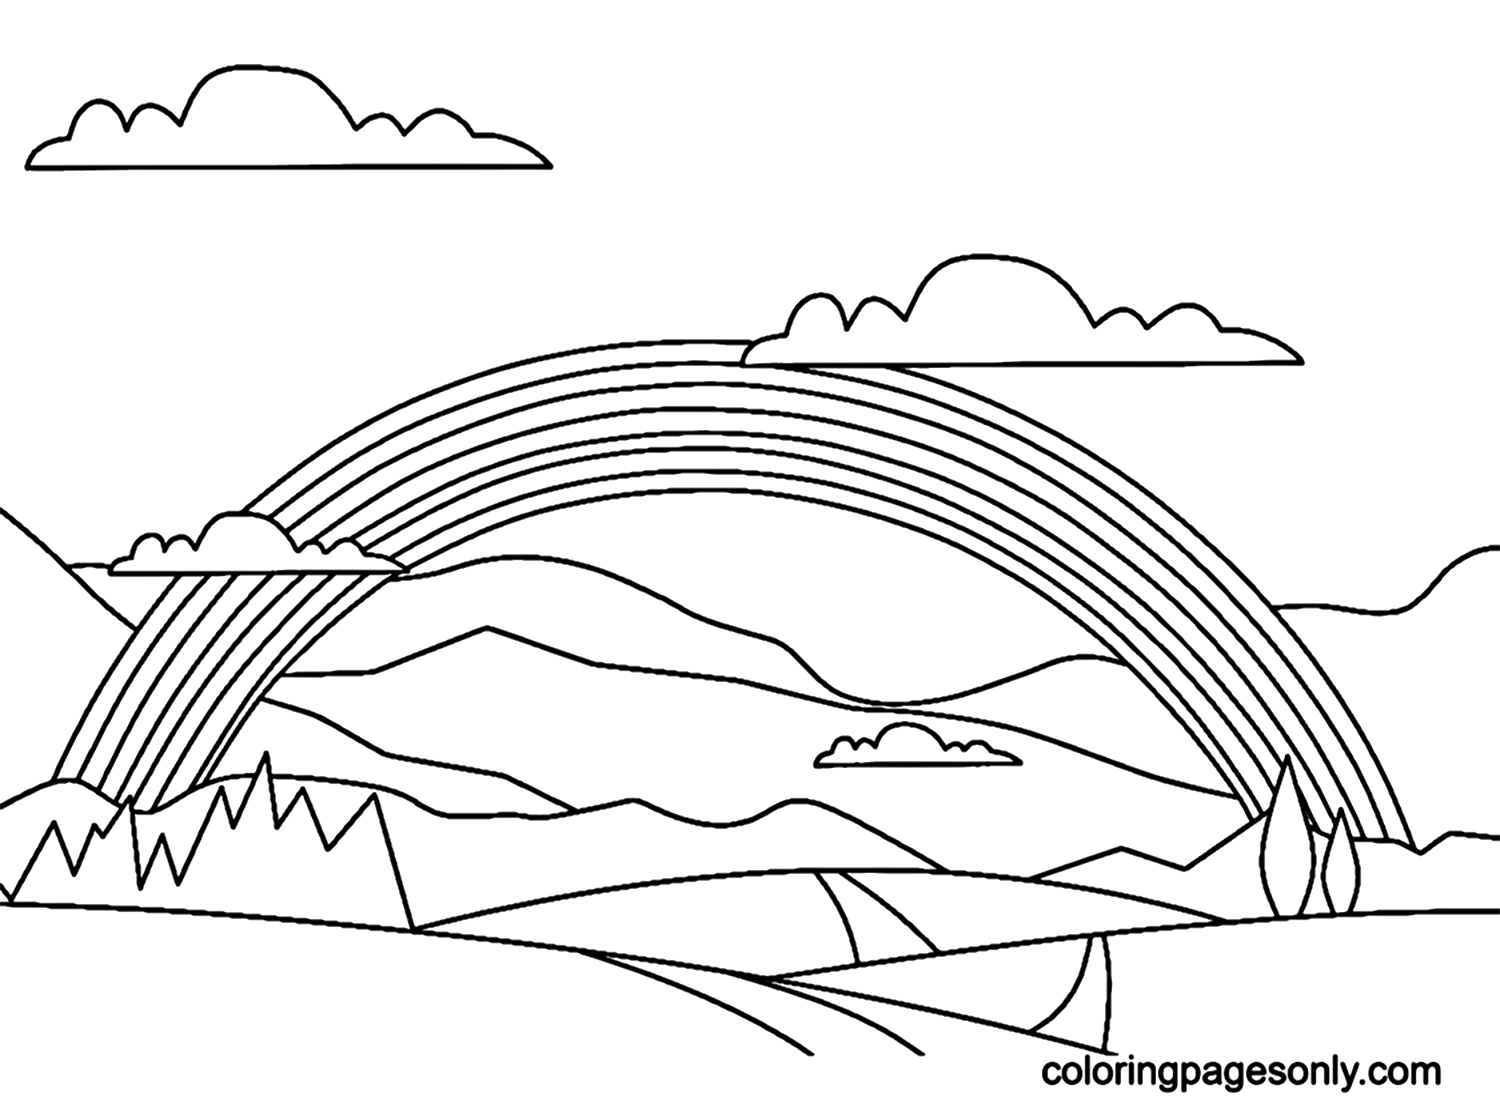 Rainbow With Magnificent Landscape Coloring Pages